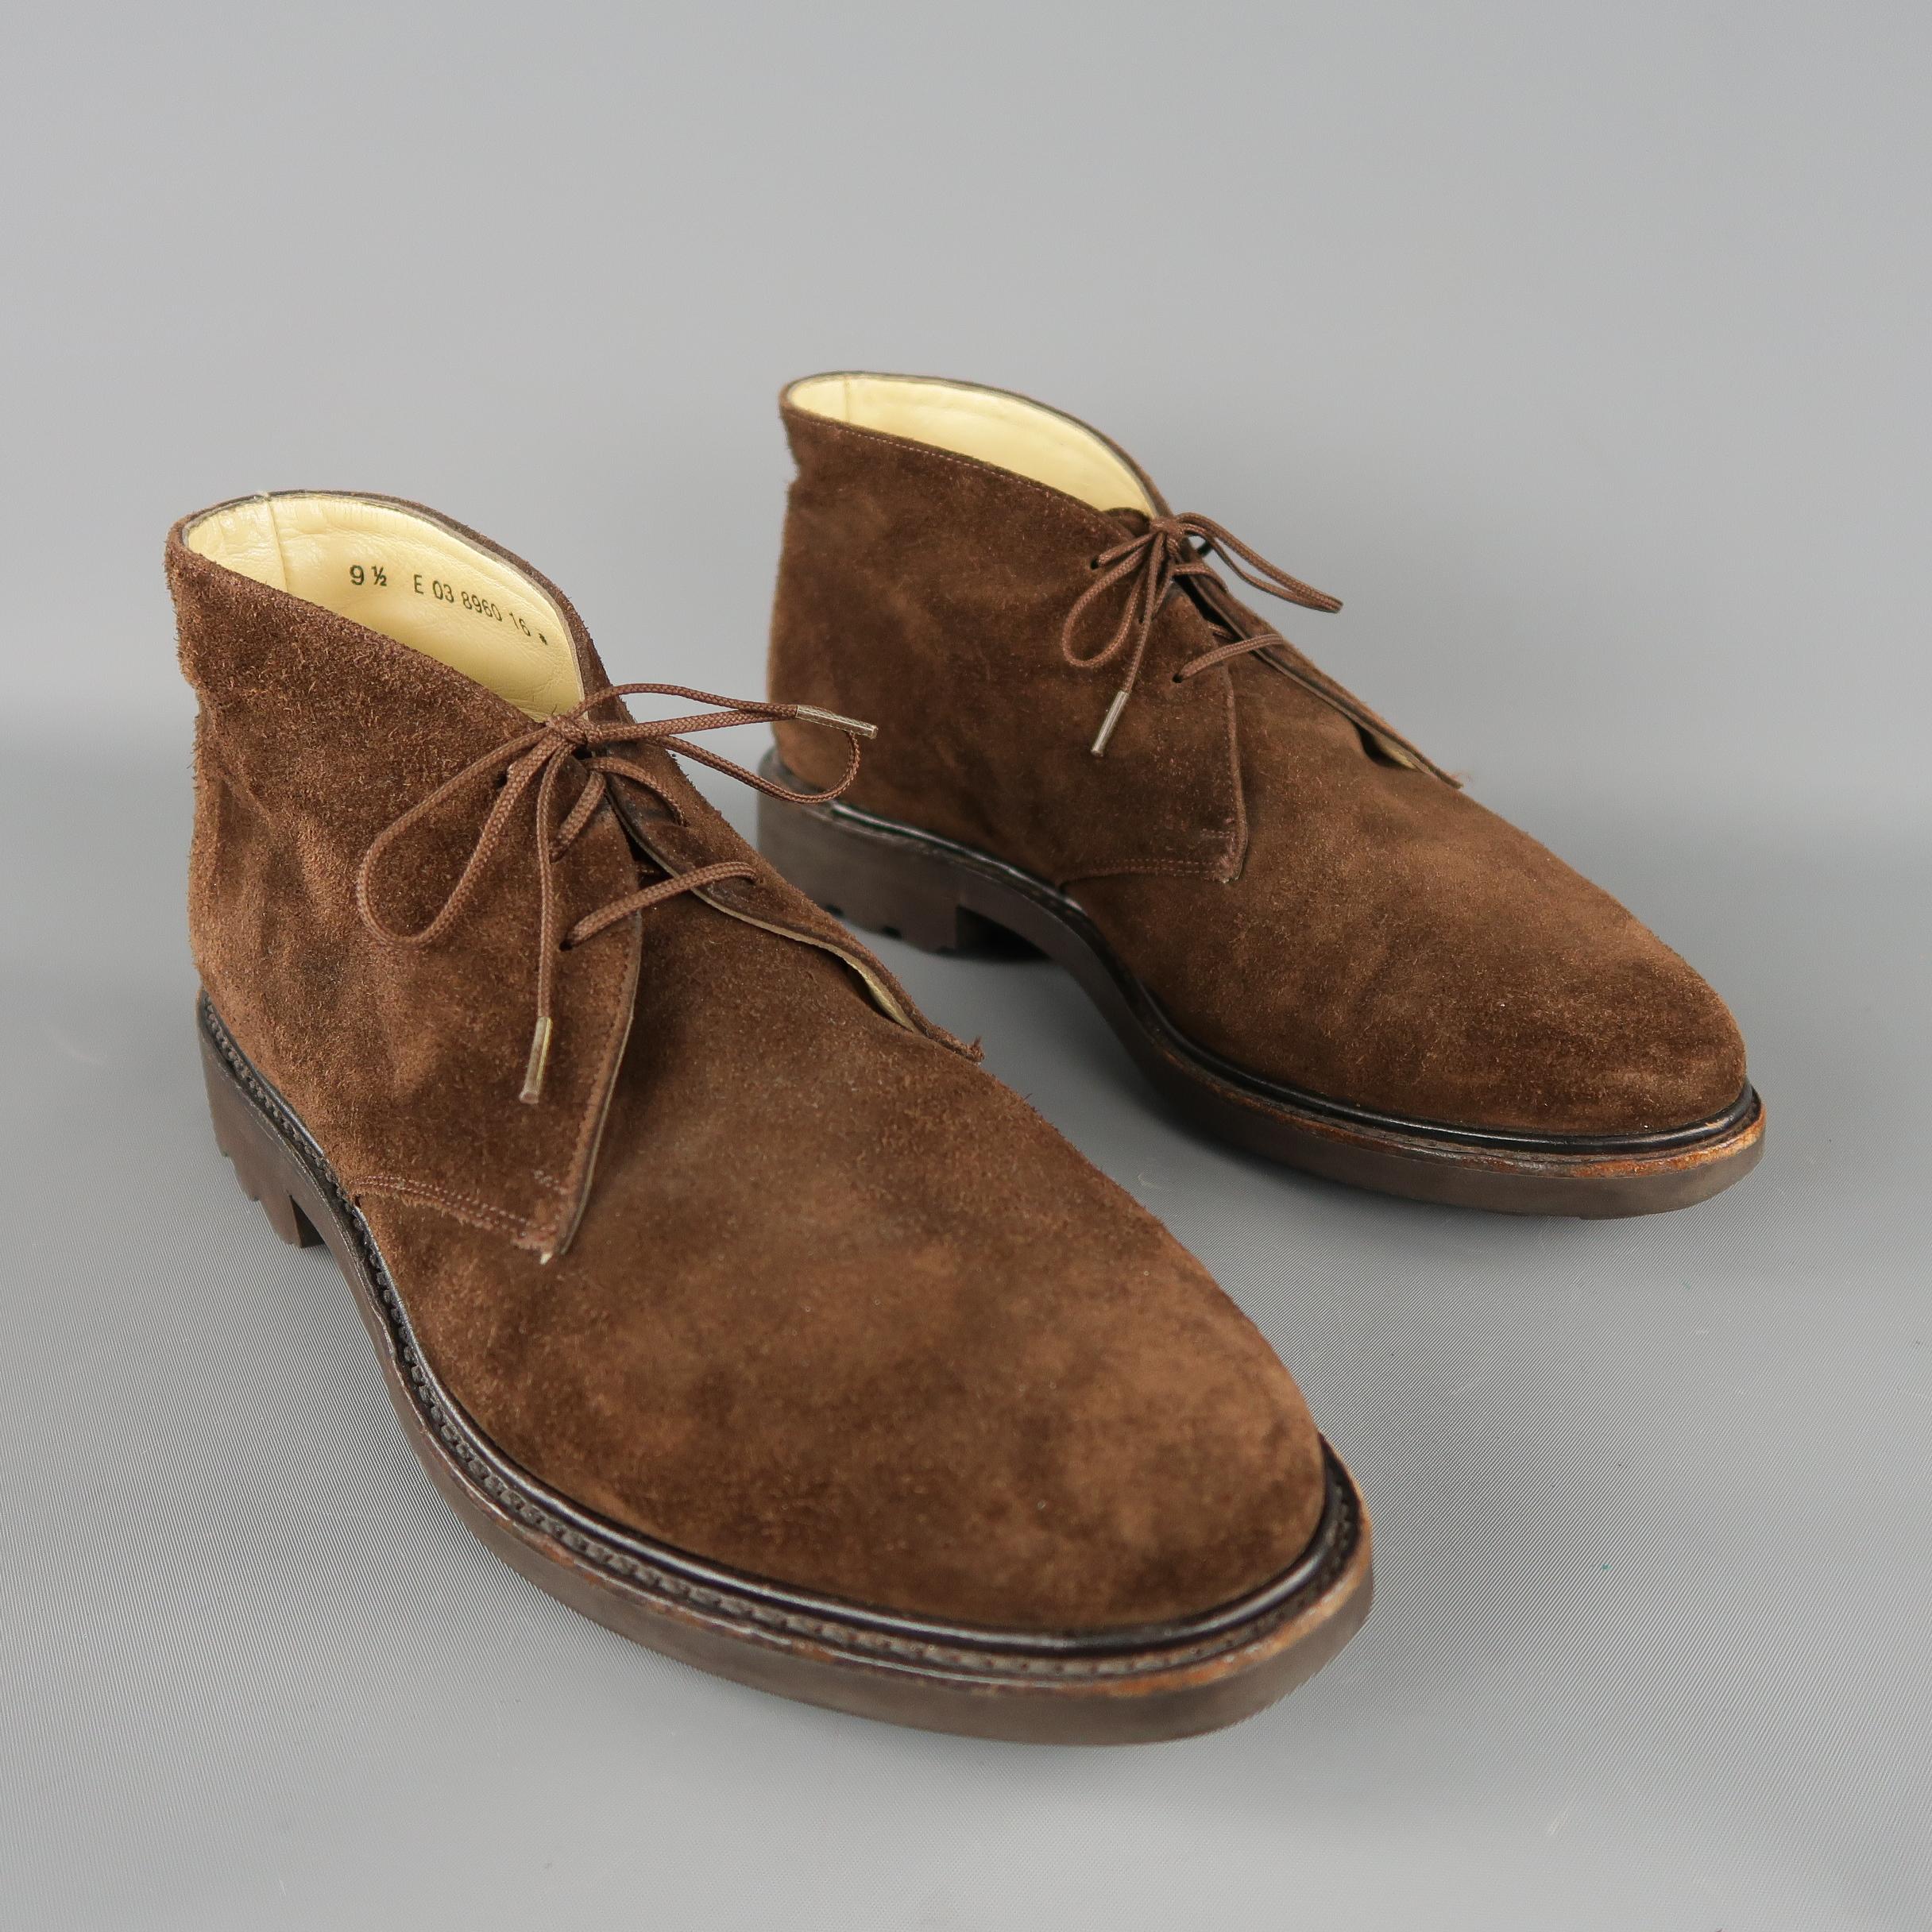 JOSEPH FENESTRIER chukka boots are in brown solid suede, lace up and with track sole. Made in France.
 
Excellent  Pre-Owned Condition.
Marked: 9.5
 
Outsole: 12 x 3  in.